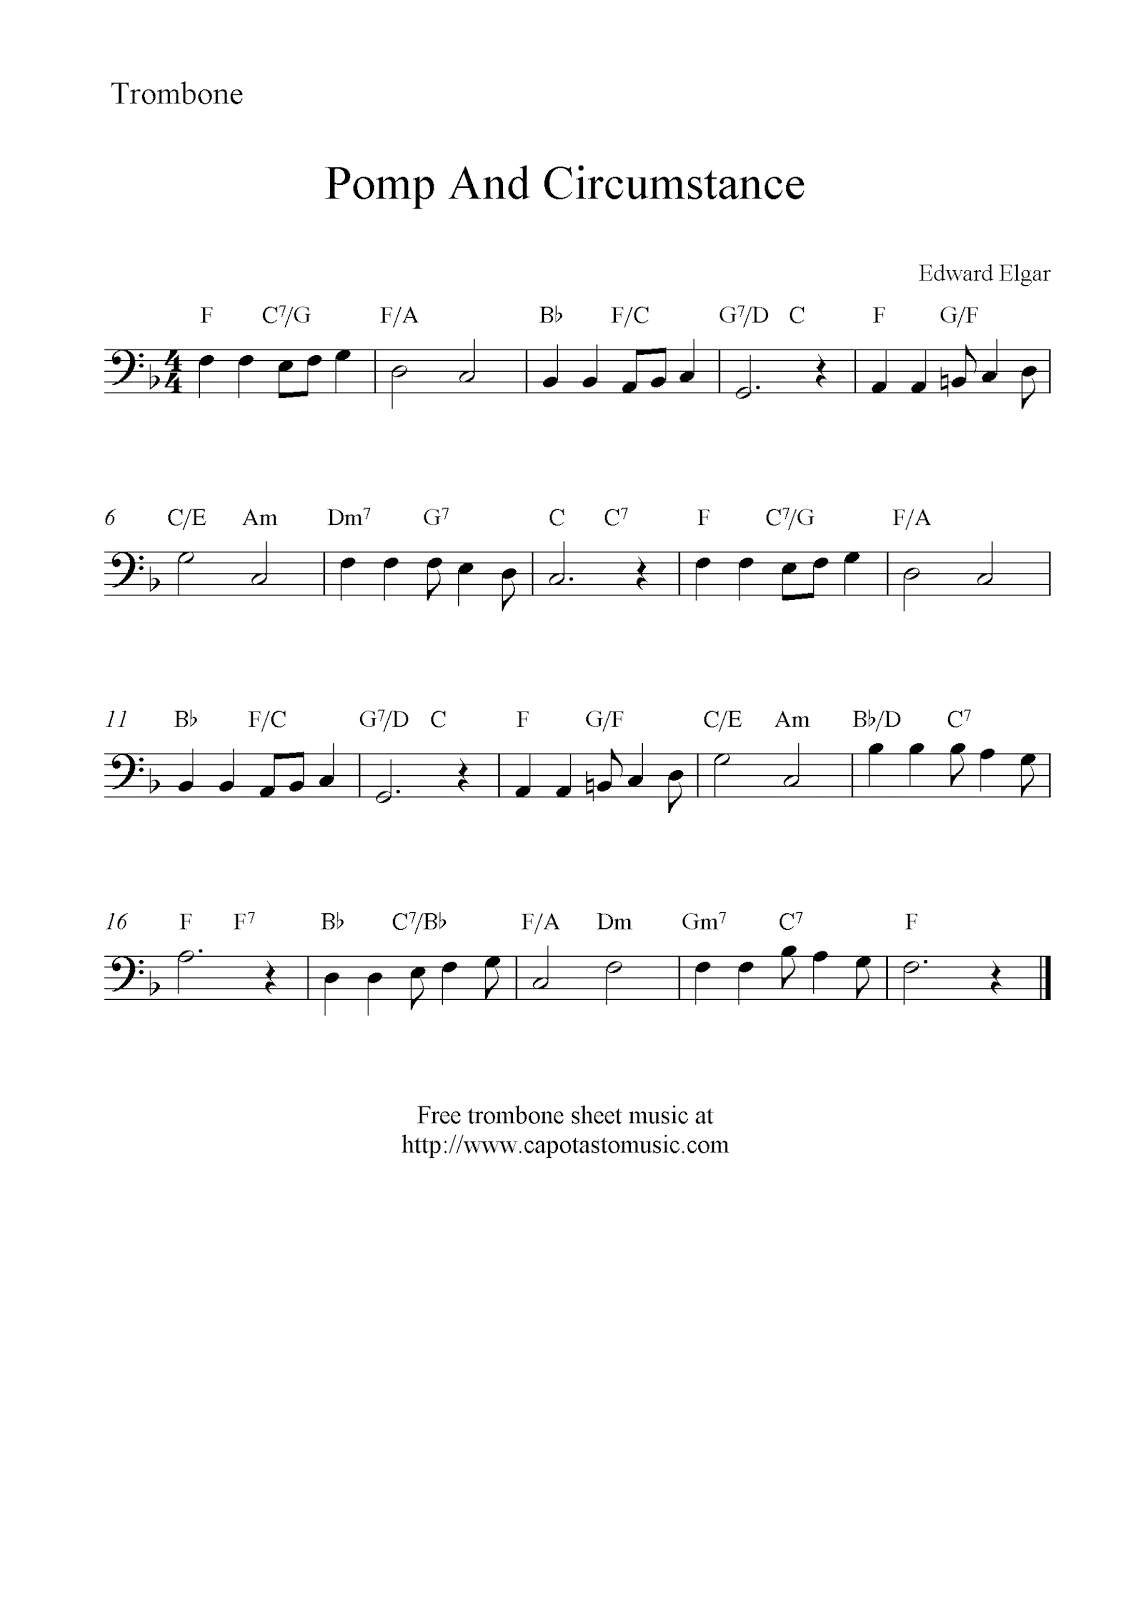 Pomp And Circumstance (Land Of Hope And Glory), Free Trombone Sheet - Free Printable Sheet Music Pomp And Circumstance